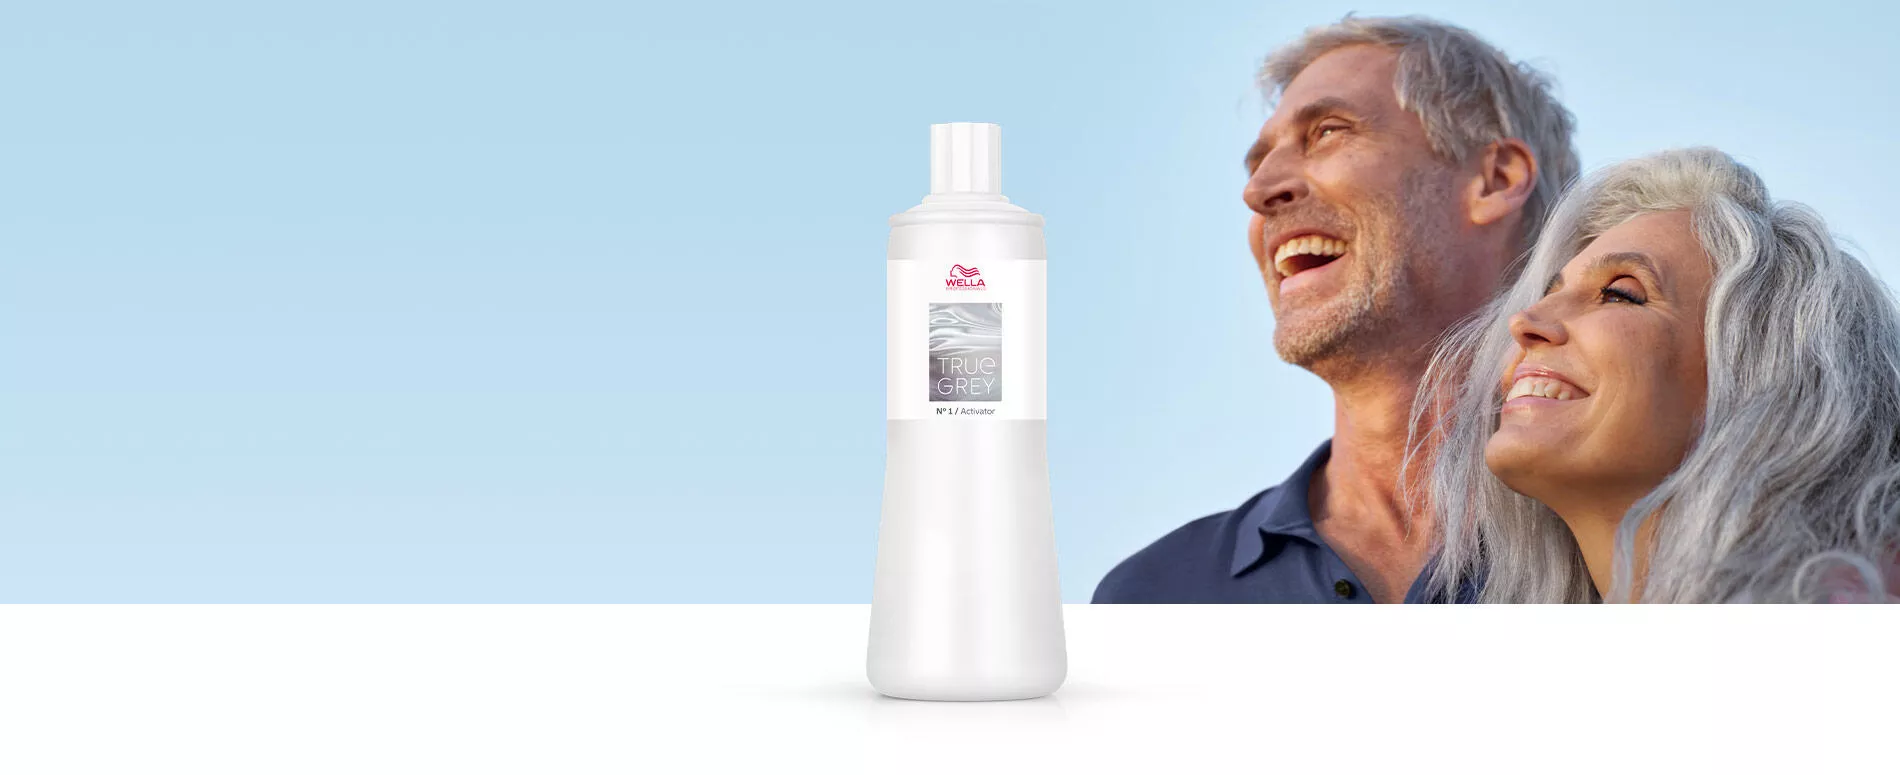 Male and female with natural grey hair laughing in the sun with True Grey Activator bottle in the foreground